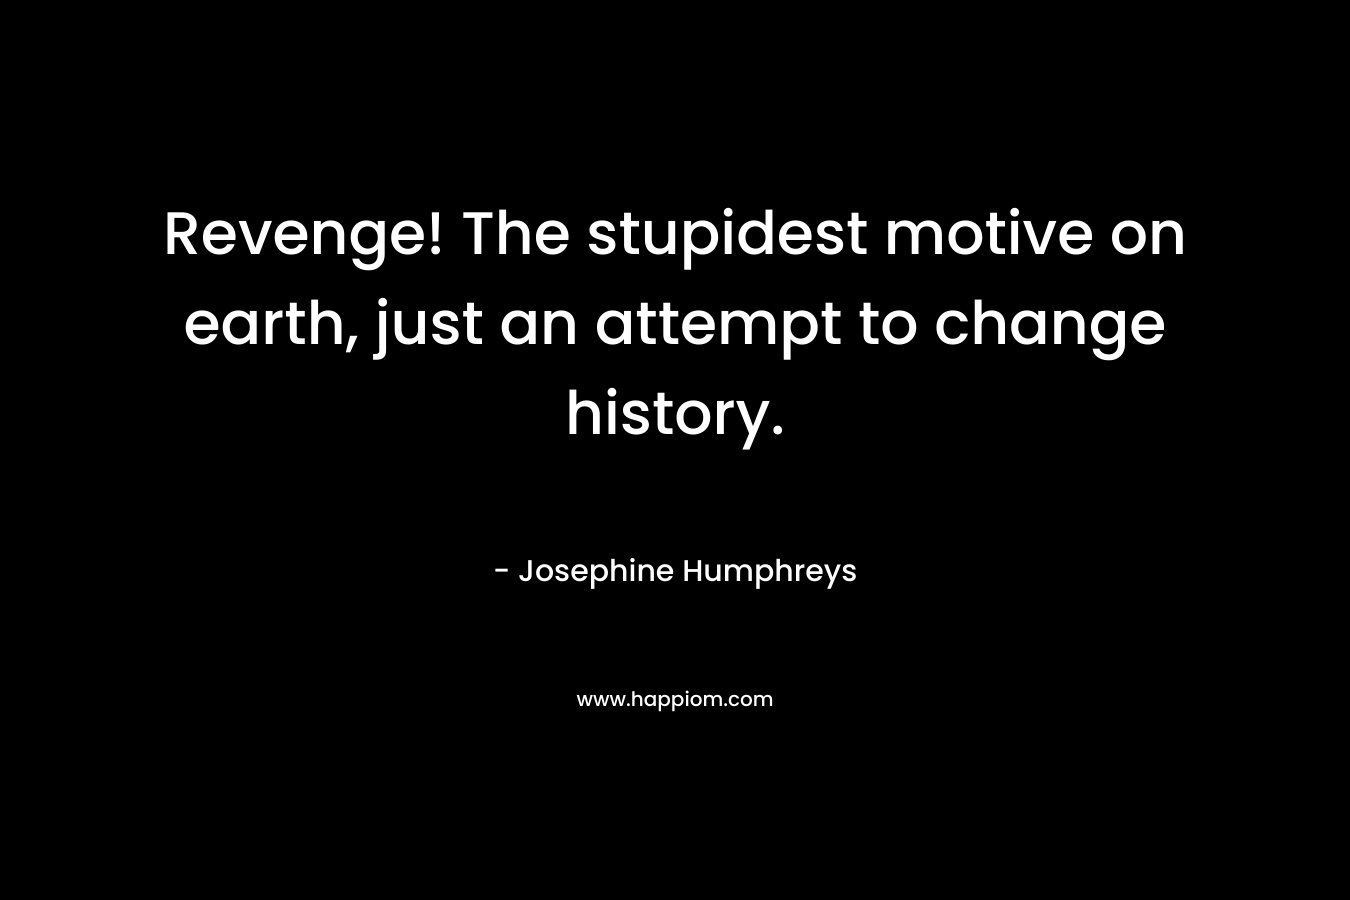 Revenge! The stupidest motive on earth, just an attempt to change history.